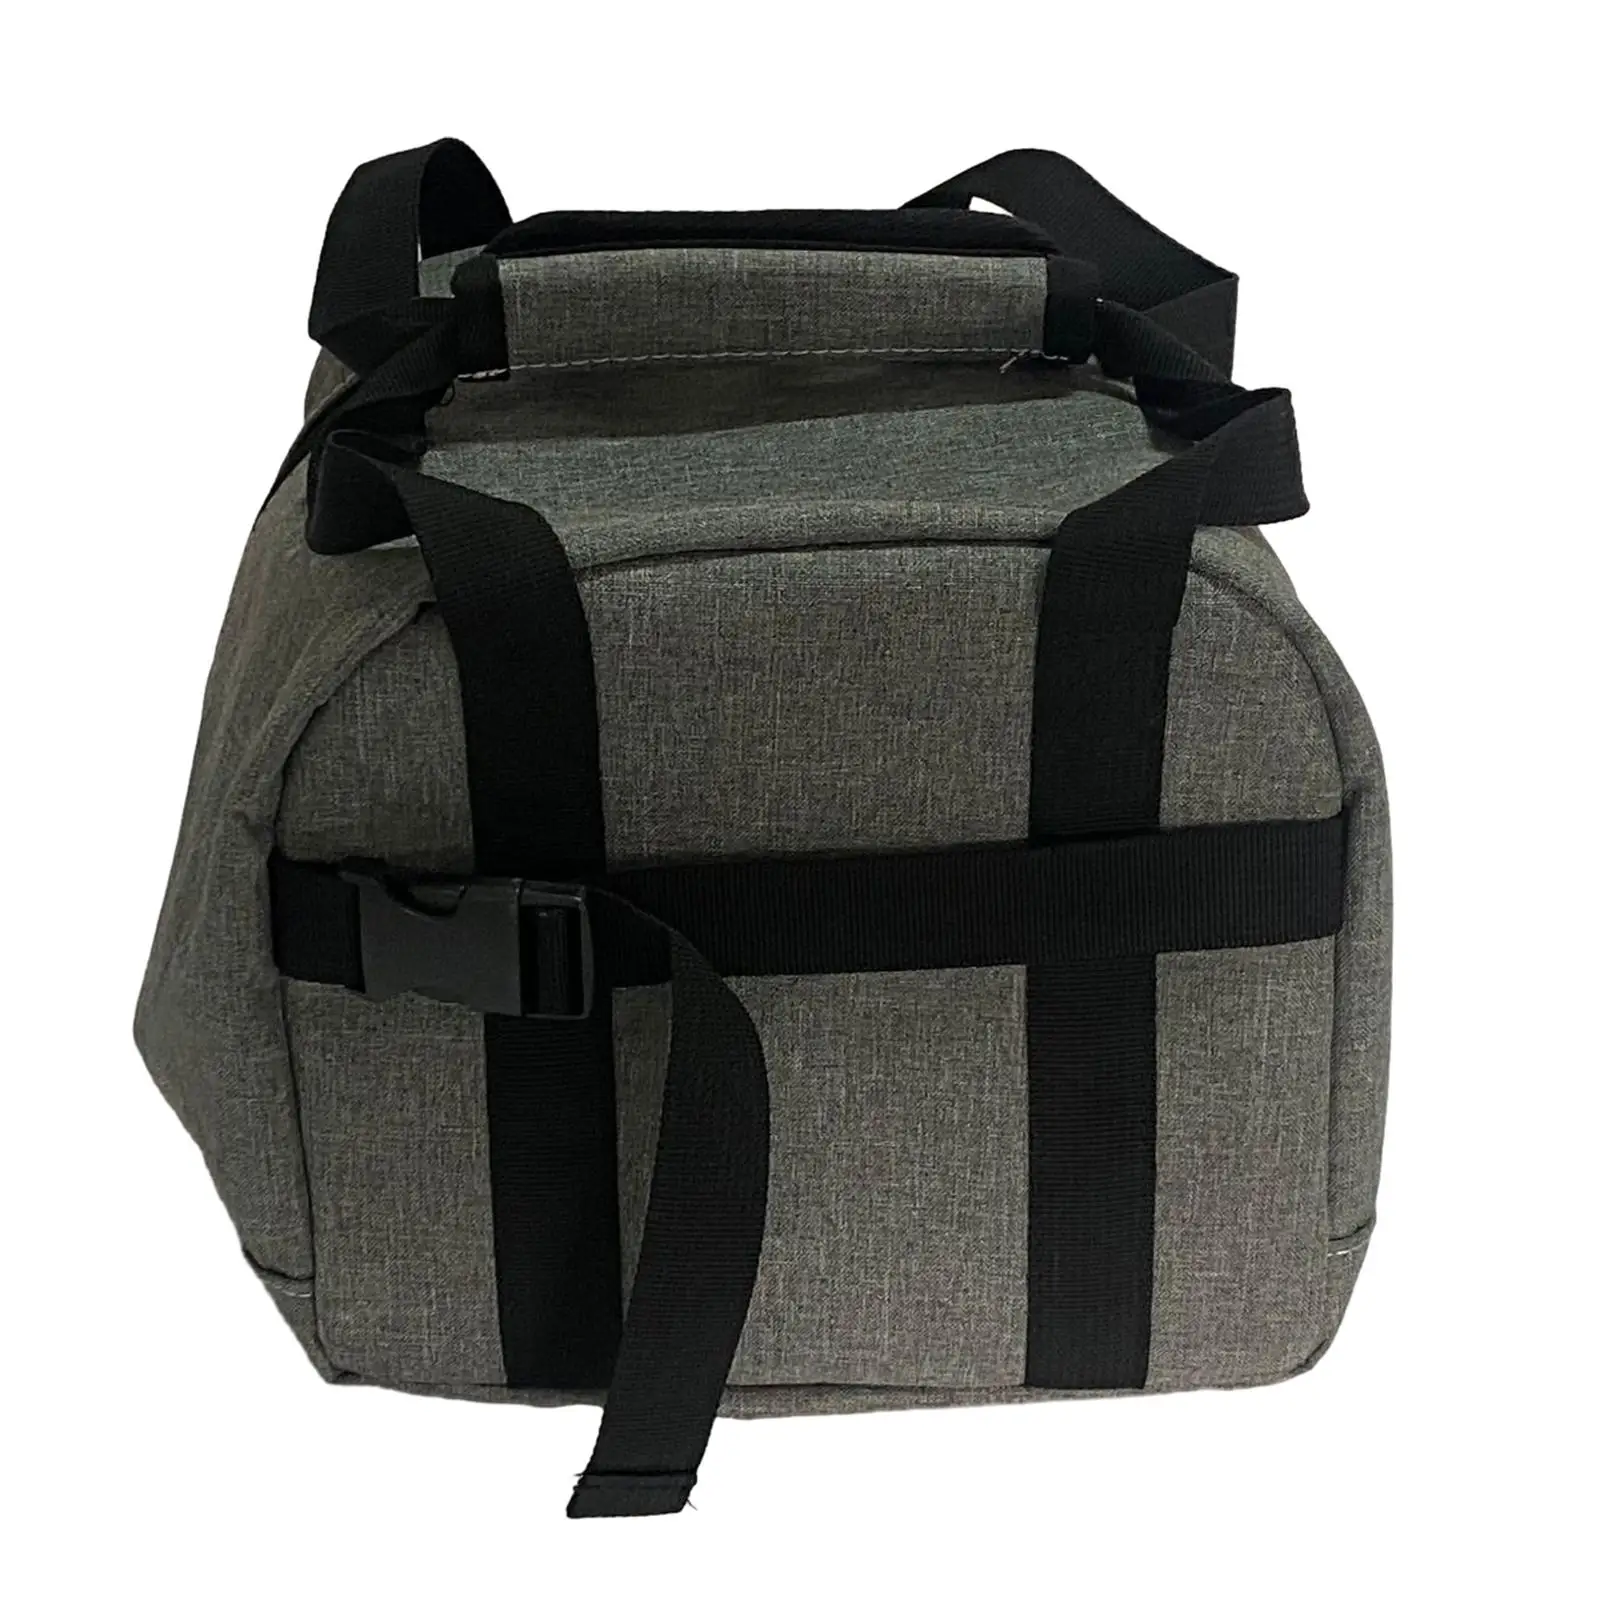 Single Bowling Ball Bag Bowling Tote Add on Durable Oxford Fabric Bowling Ball Holder for Women Men Bowling Accessories